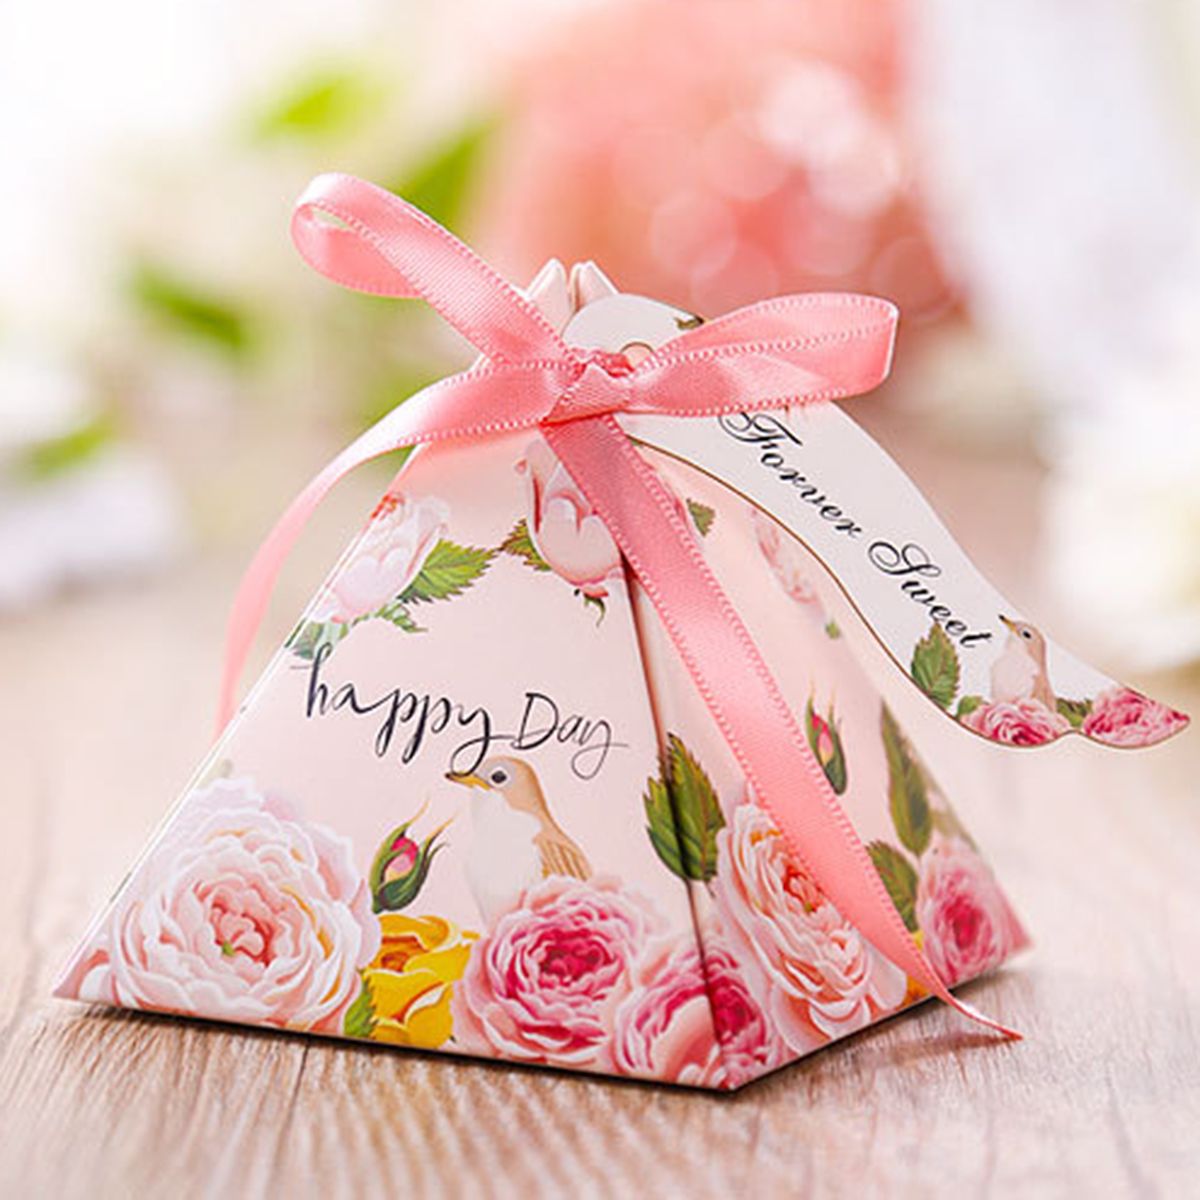 50PCS-Spring-Flower-Candy-Boxes-Paper-Wedding-Party-Decorations-Favour-Sweet-Boxes-Bags-Ribbons-Tags-1421522